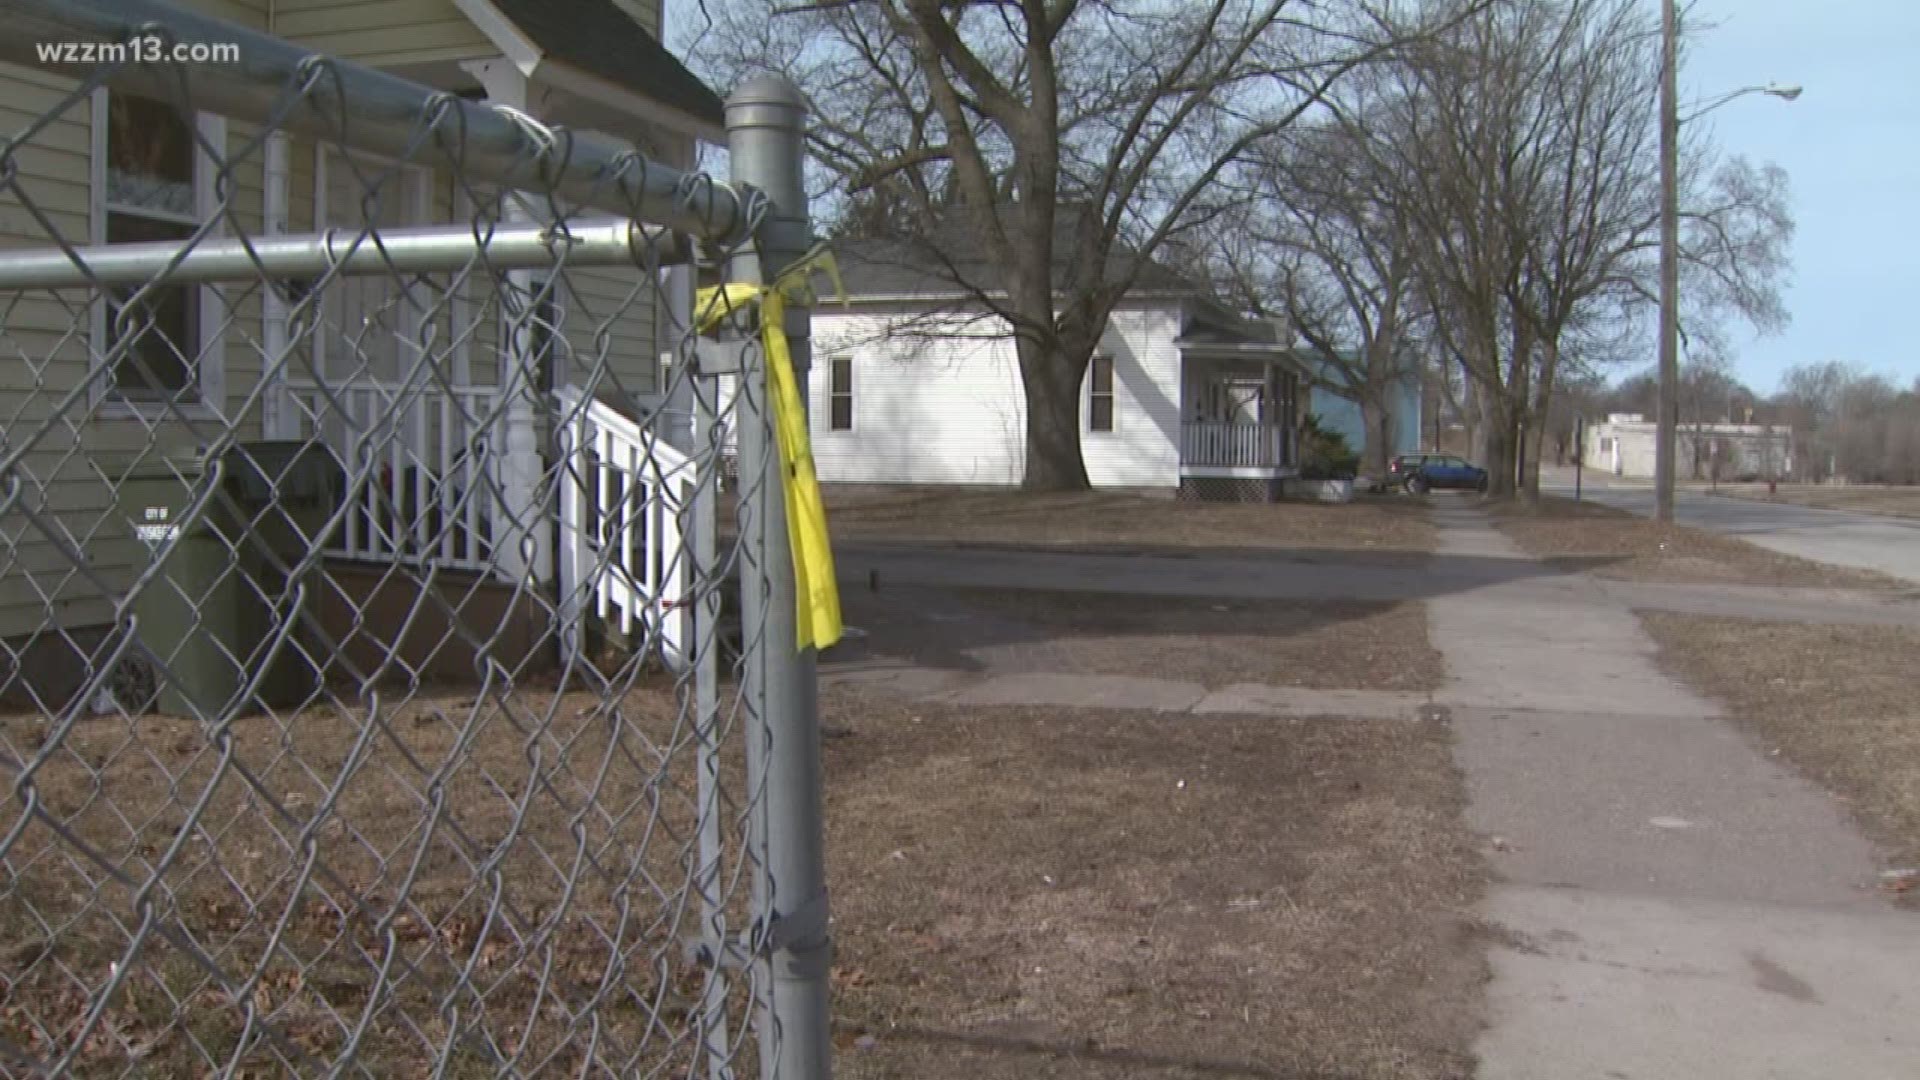 Man in stable condition after shooting in Muskegon